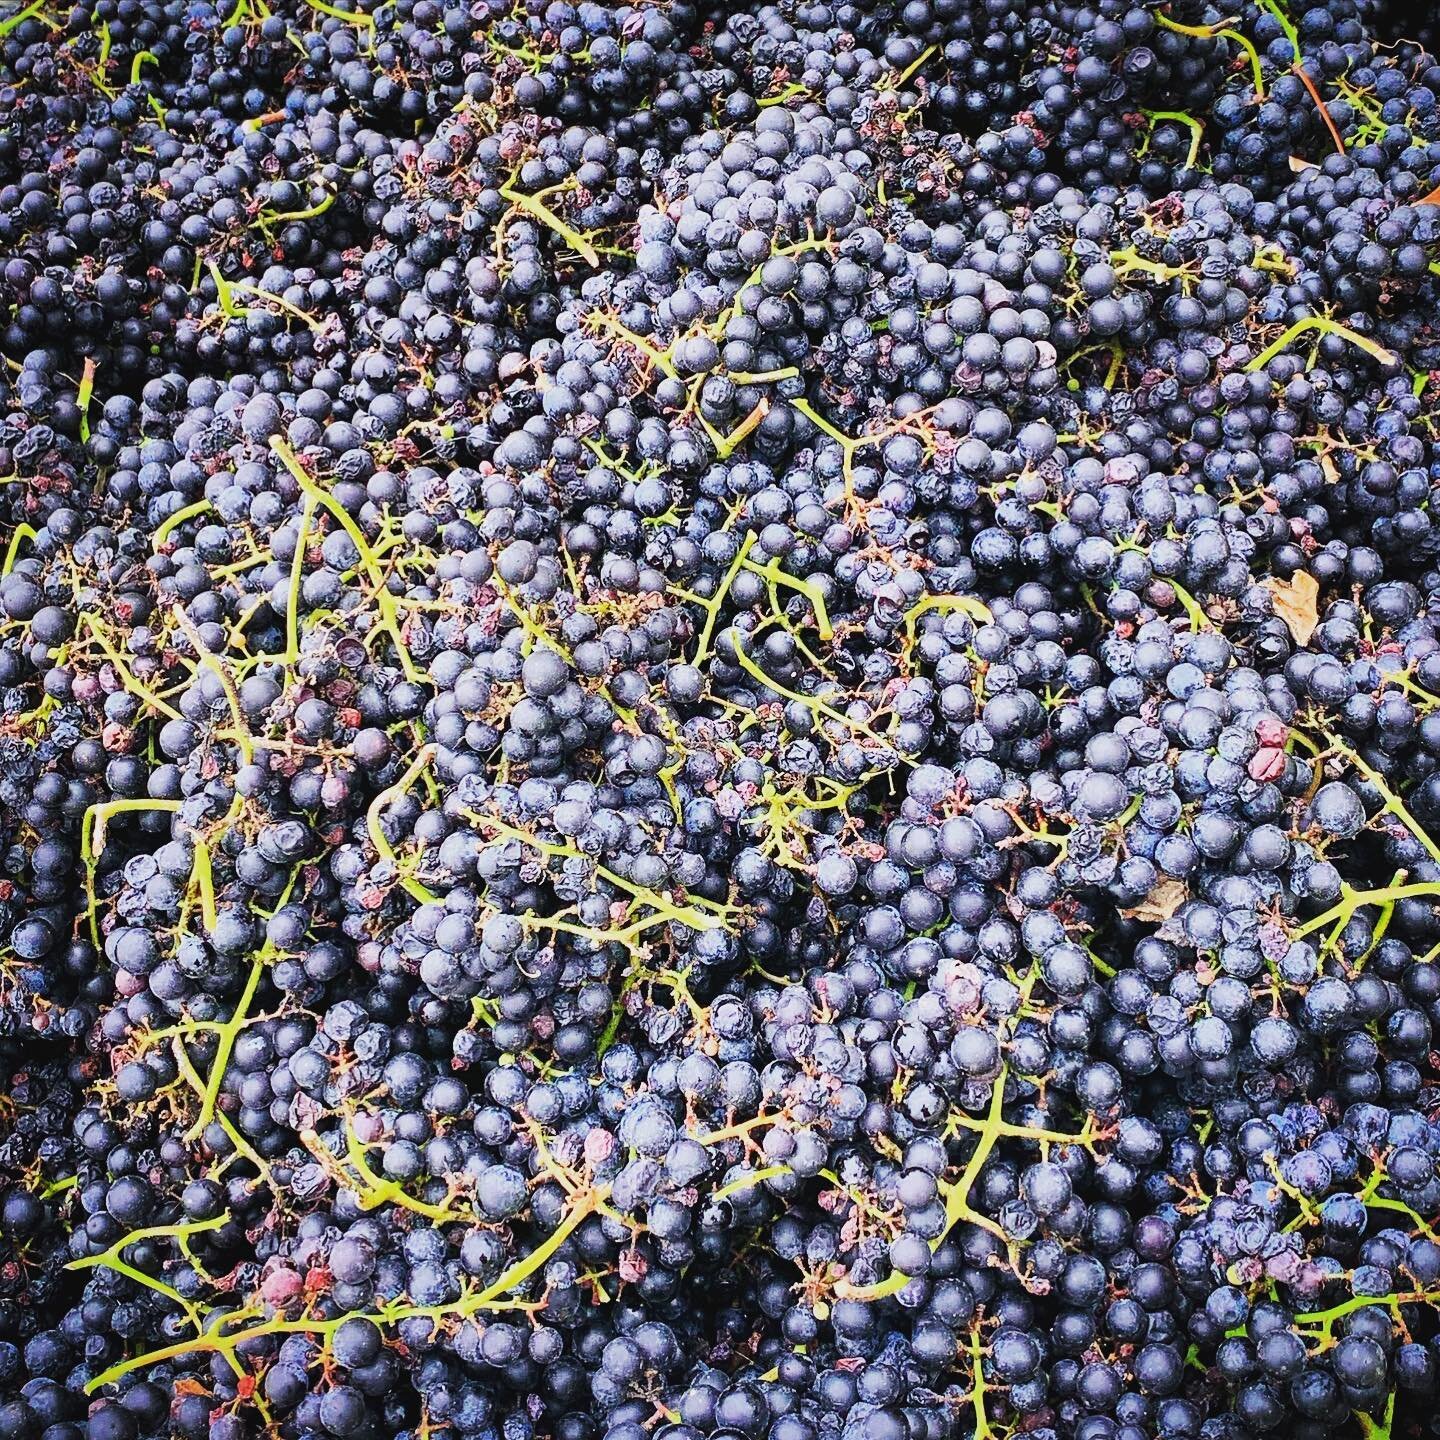 &ldquo;Grape vines are old creatures that produce new and beautiful things each year.&rdquo;

- #FieldBlendsBook 

💜 to #harvest time at @greenhillwine. Seasonal rhythm is one of my favorite things about #wine... and #life.

#grapes #winelover #wine